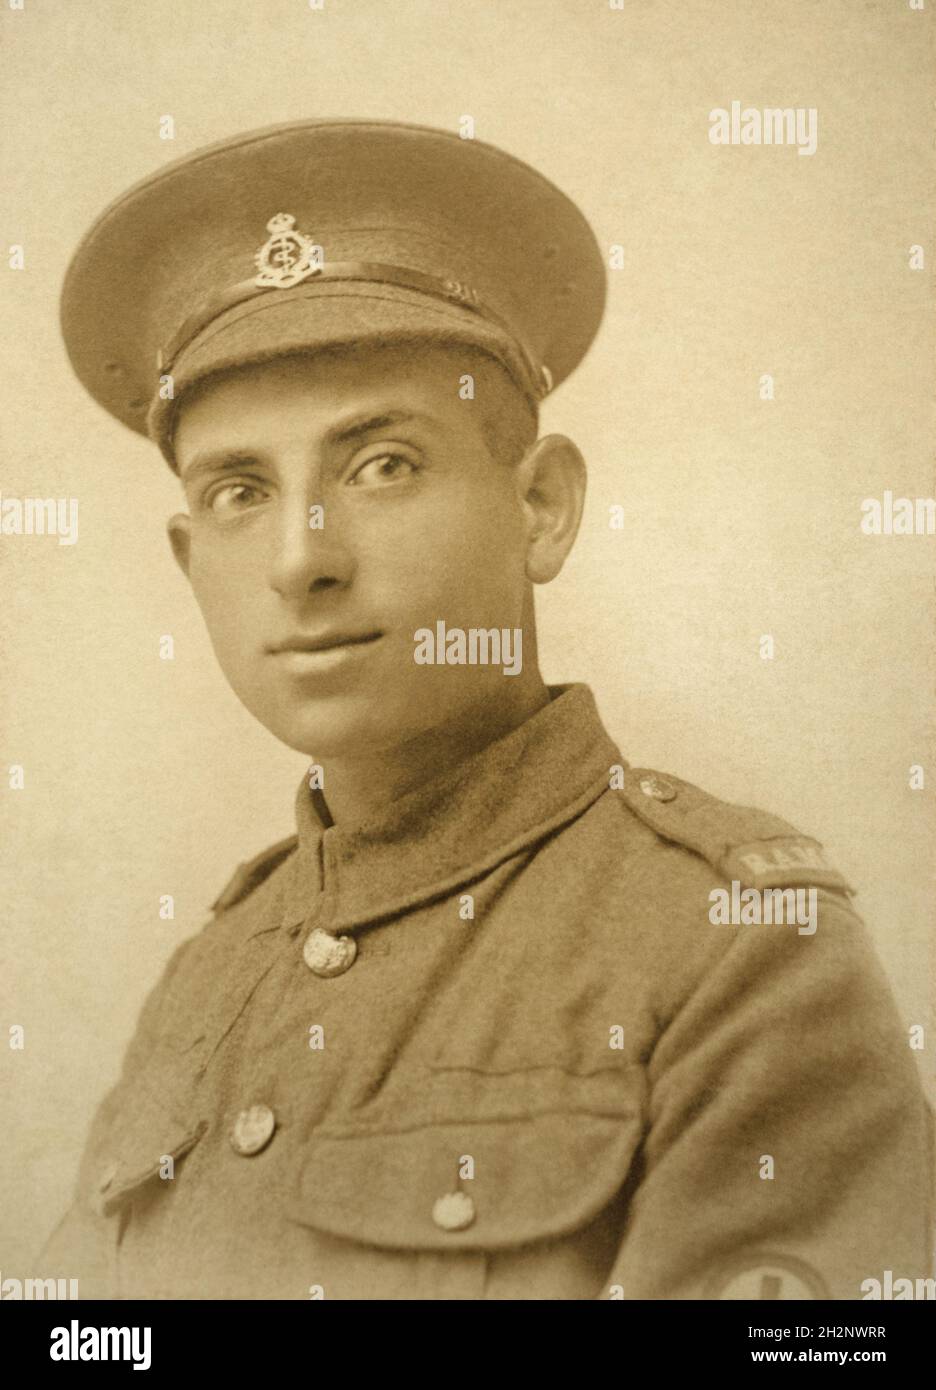 A First World War era portrait of a British army soldier, a Private in the Royal Army Medical Corps (RAMC). He has cloth RAMC shoulder titles rather than the usual metal versions. Stock Photo